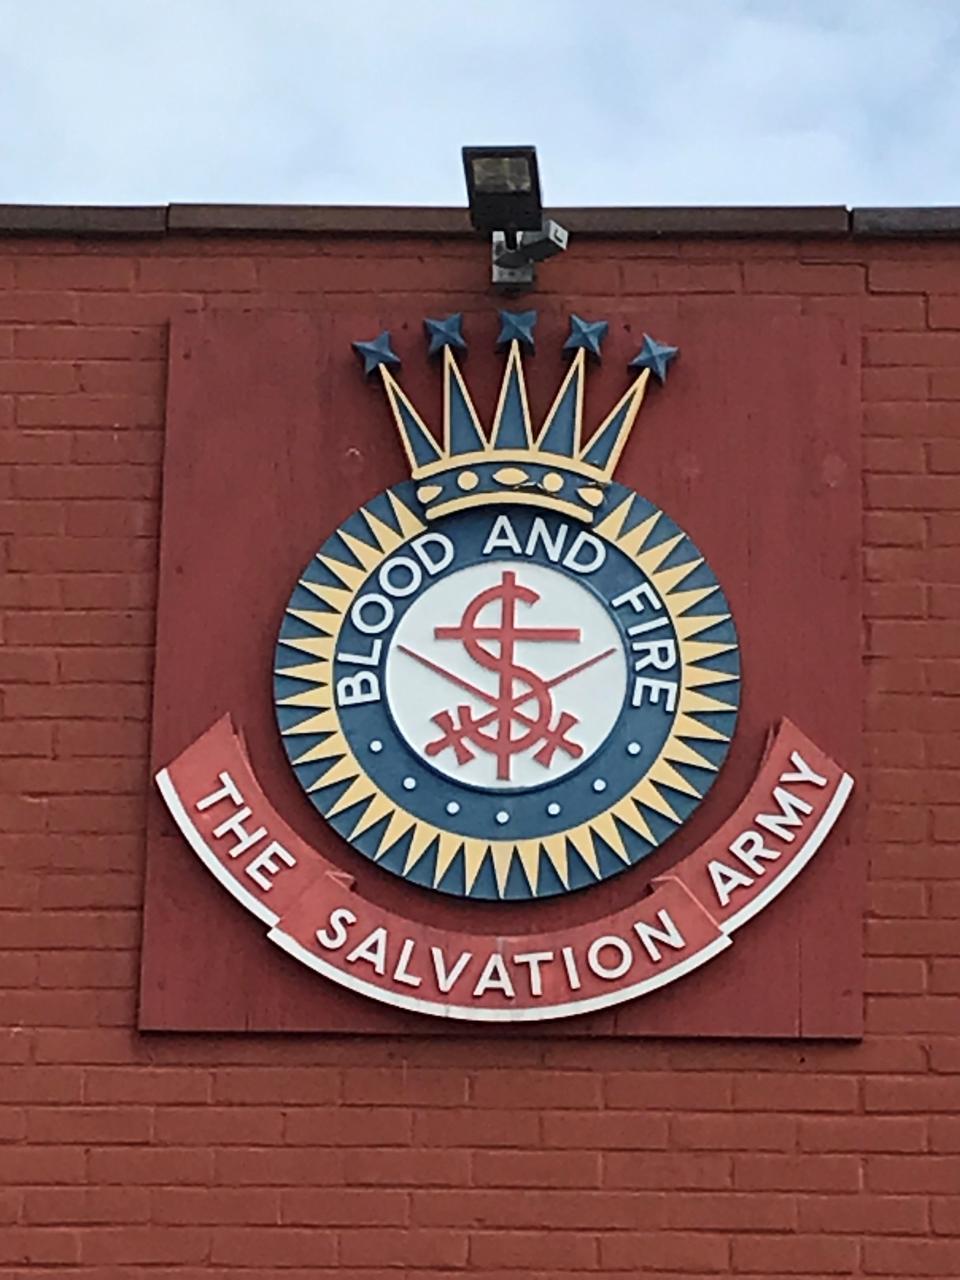 This symbol at the Salvation Army headquarters on Lake Street in Elmira.